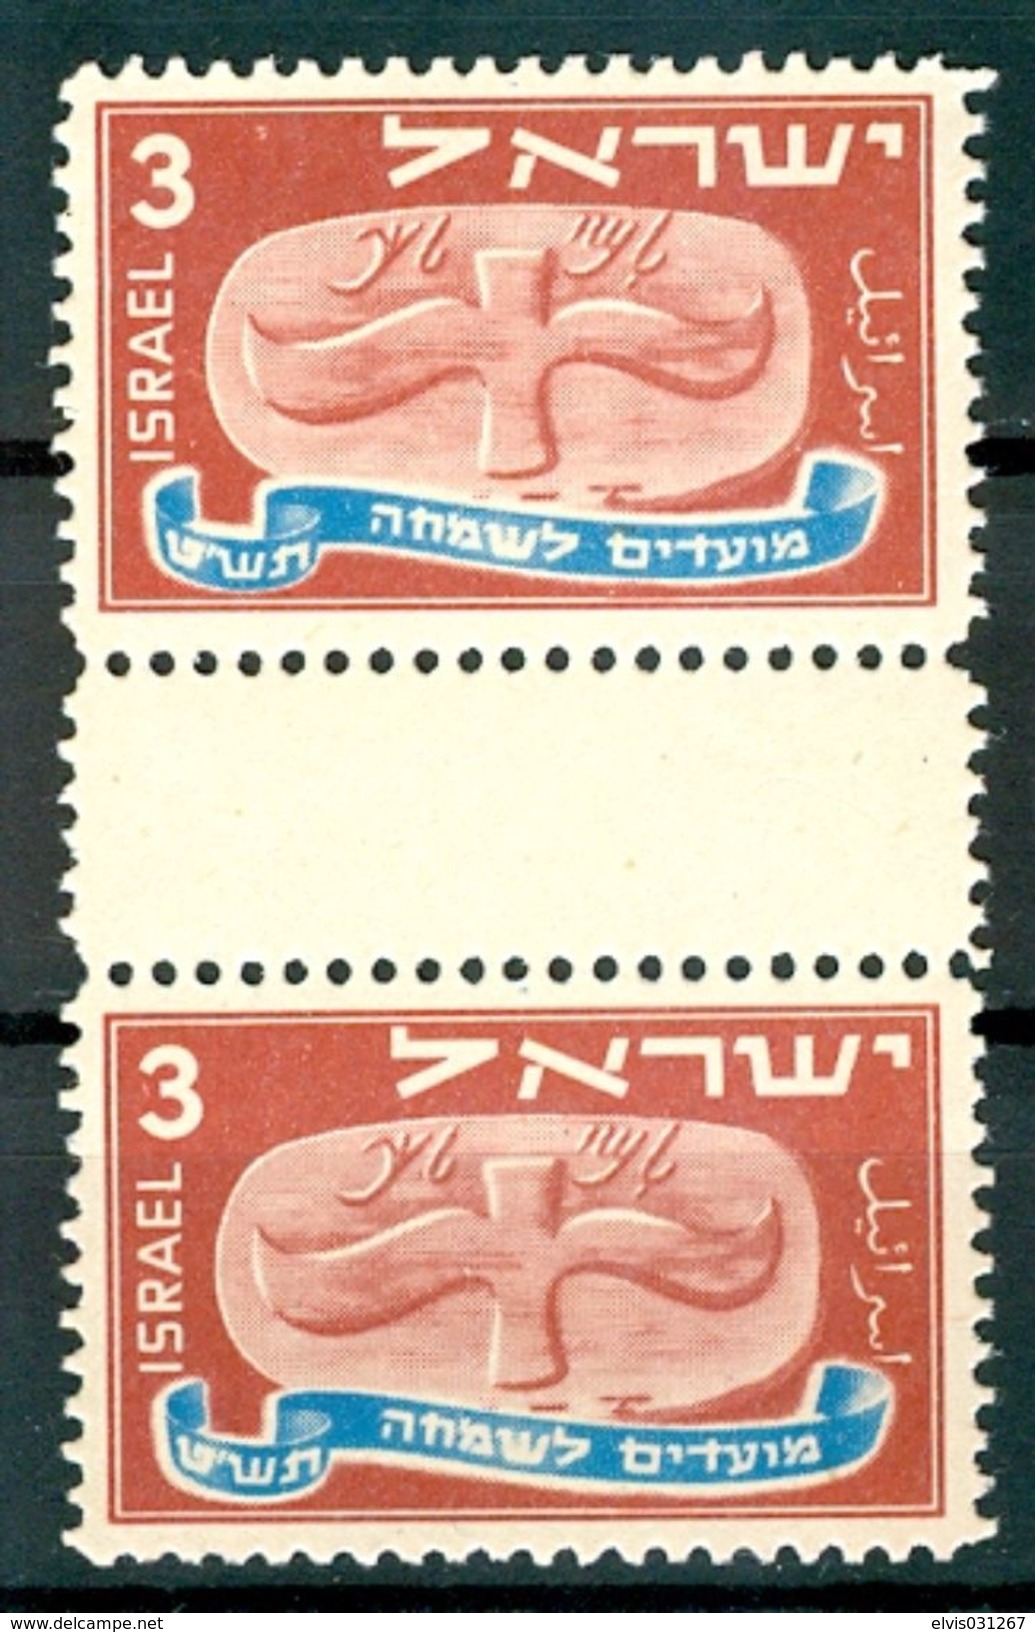 Israel - 1948, Michel/Philex No. : 10b, NEW YEAR ISSUE - VERTICAL GUTTER PAIRS - MNH - *** - - Nuevos (con Tab)